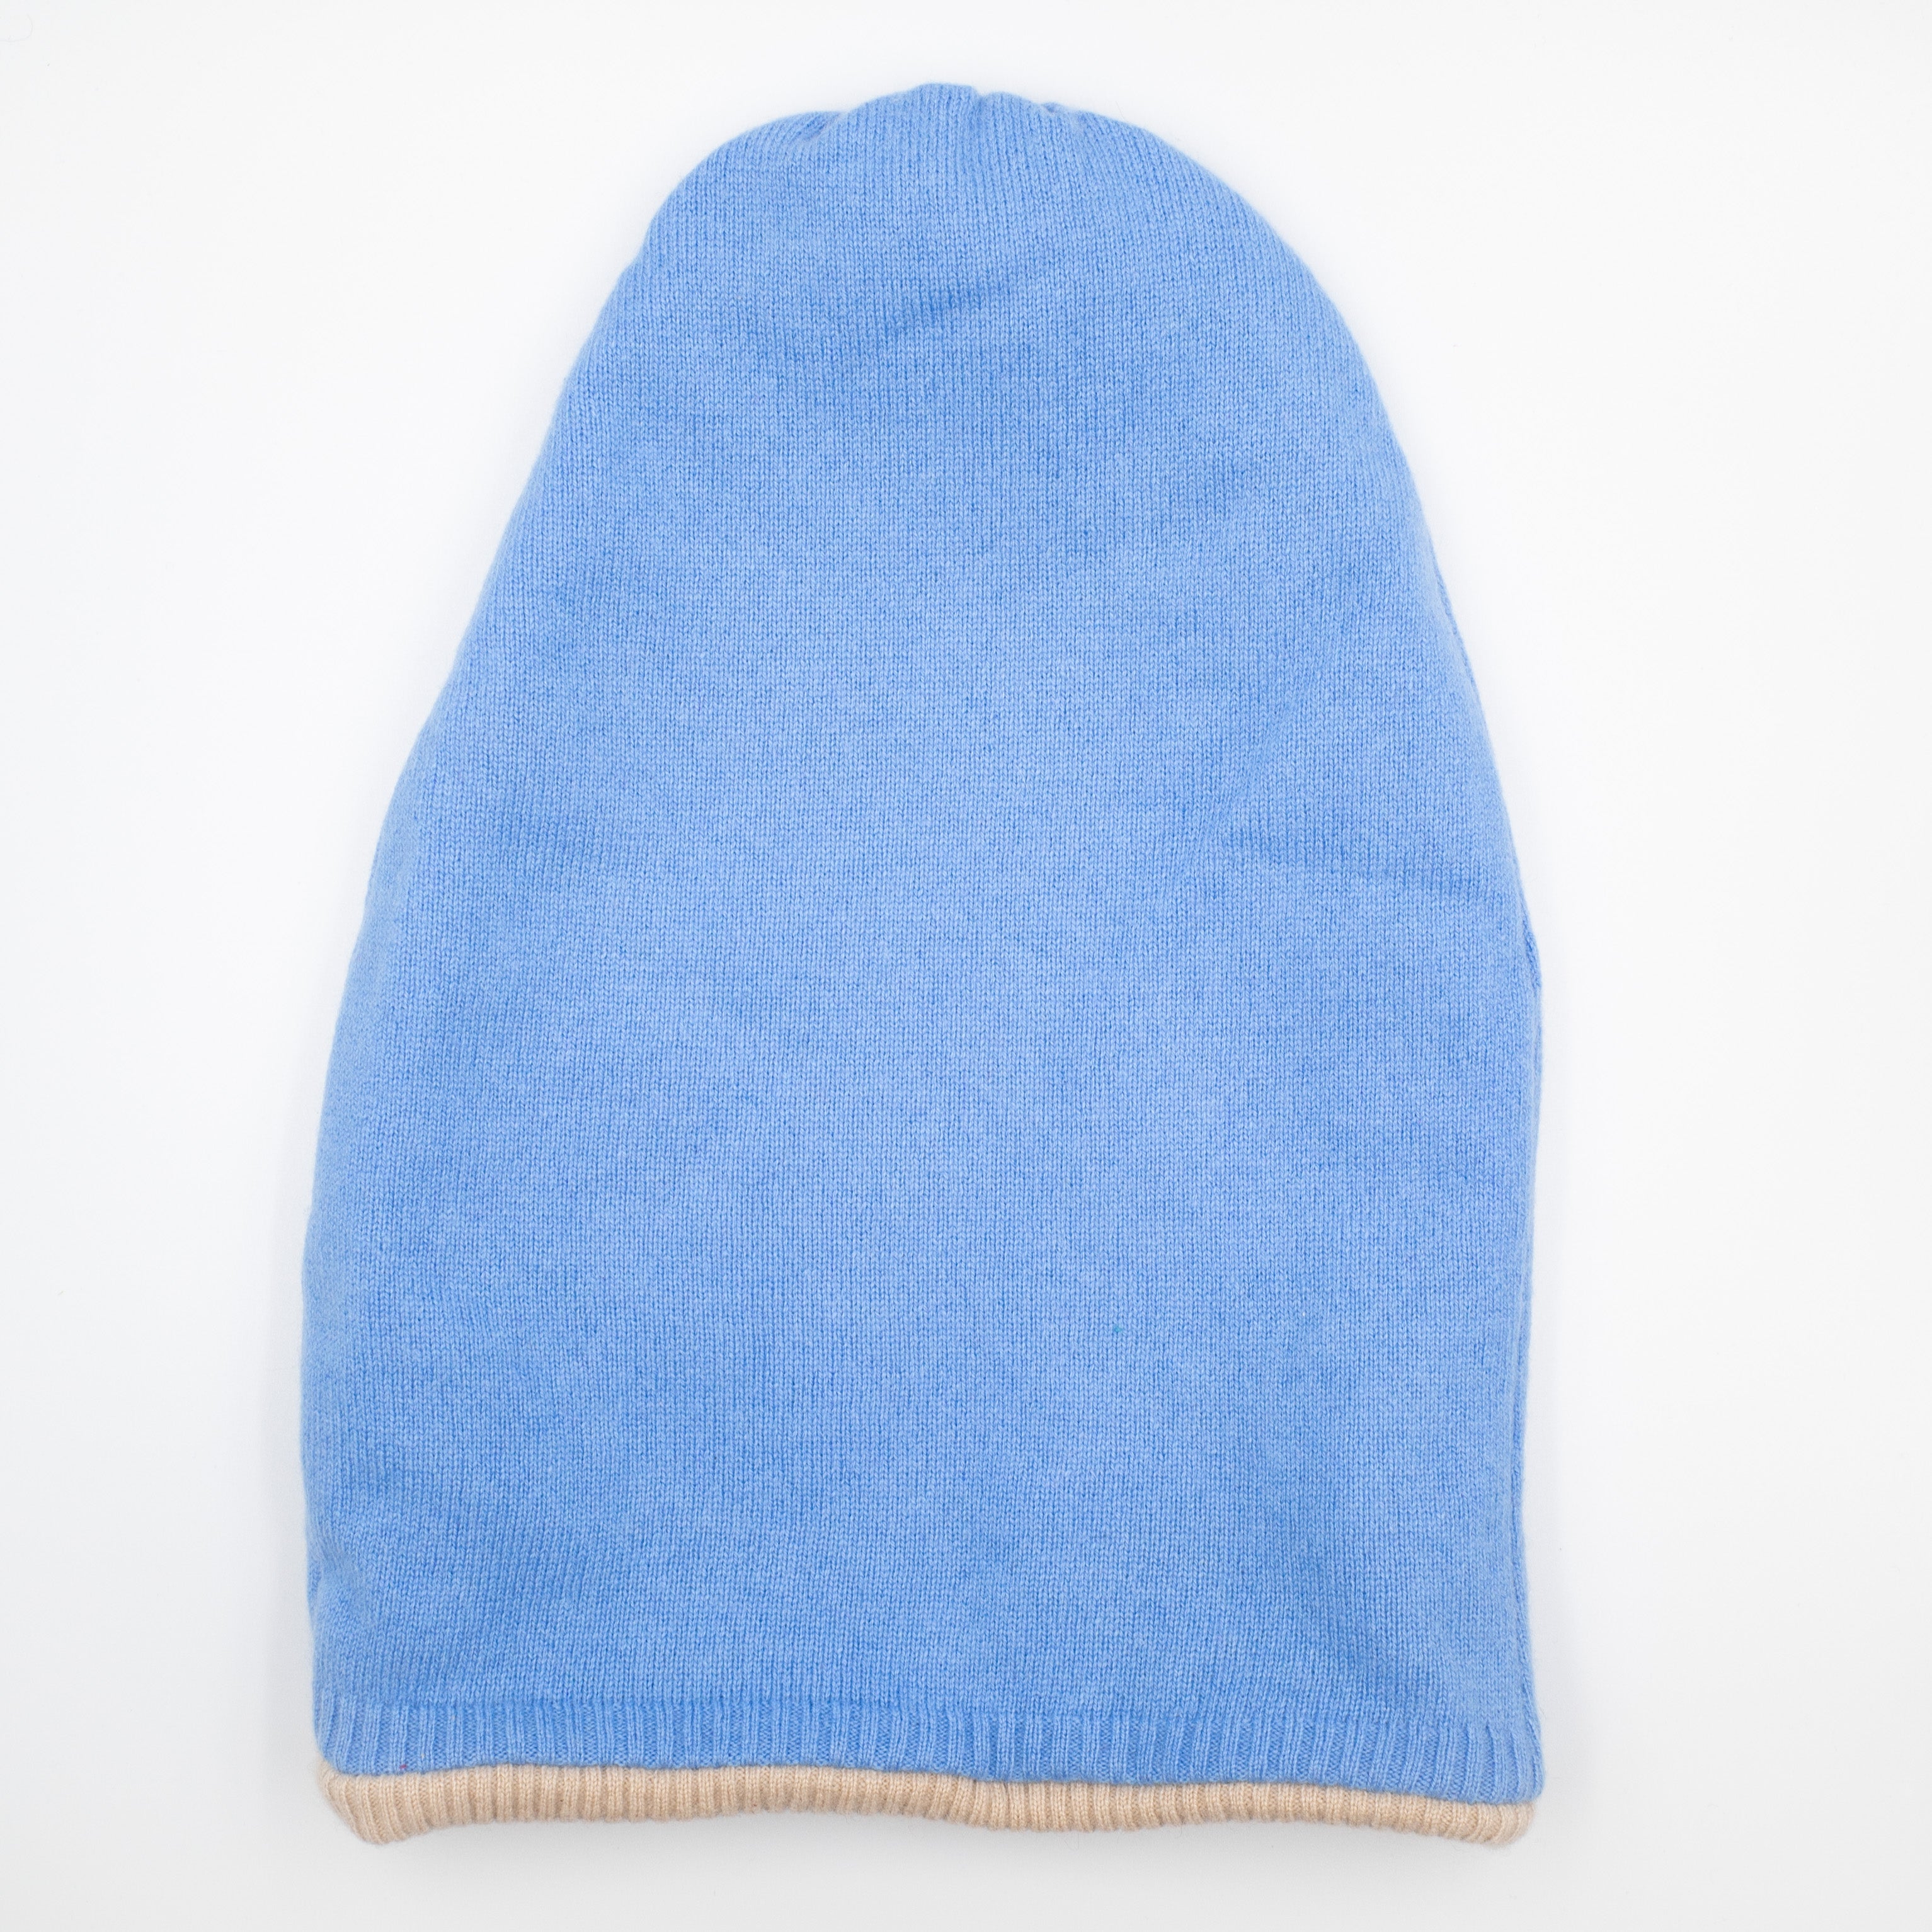 Sky Blue and Beige Reversible Slouchy Beanie Hat